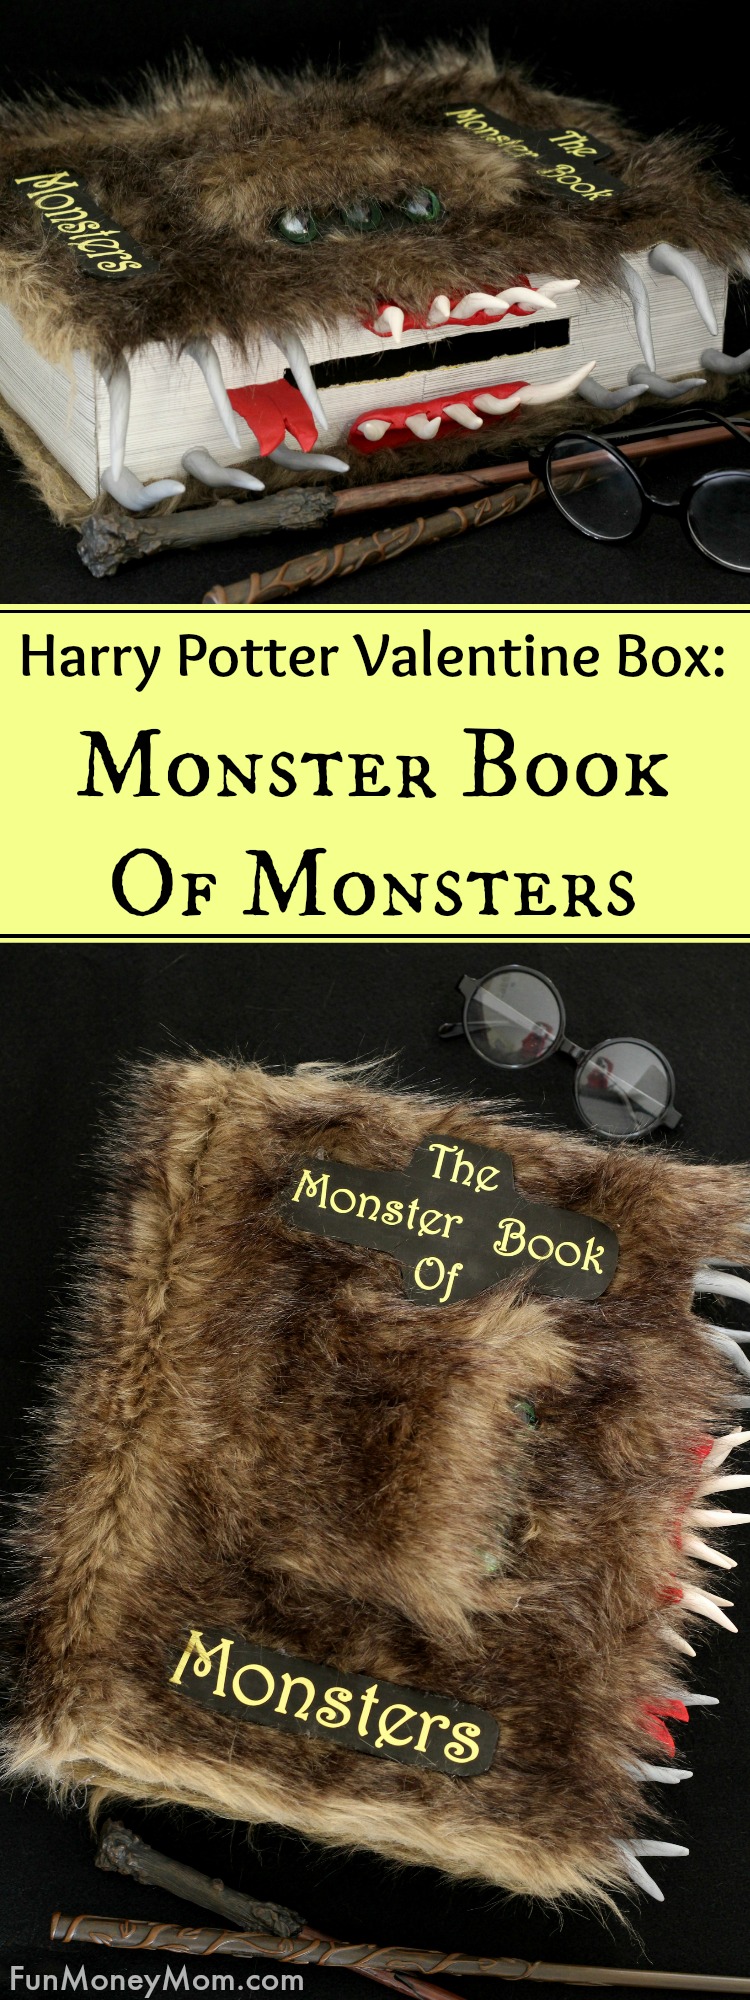 Harry Potter Valentine Box - This Monster Book Of Monsters Valentine Box is the perfect Valentine's Day Box for little Harry Potter fans. #harrypotter #harrypottervalentine #harrypottervalentinebox #monsterbookofmonsters #monsterbookofmonstersbox #monsterbookofmonstersvalentine #valentinebox #valentinesday